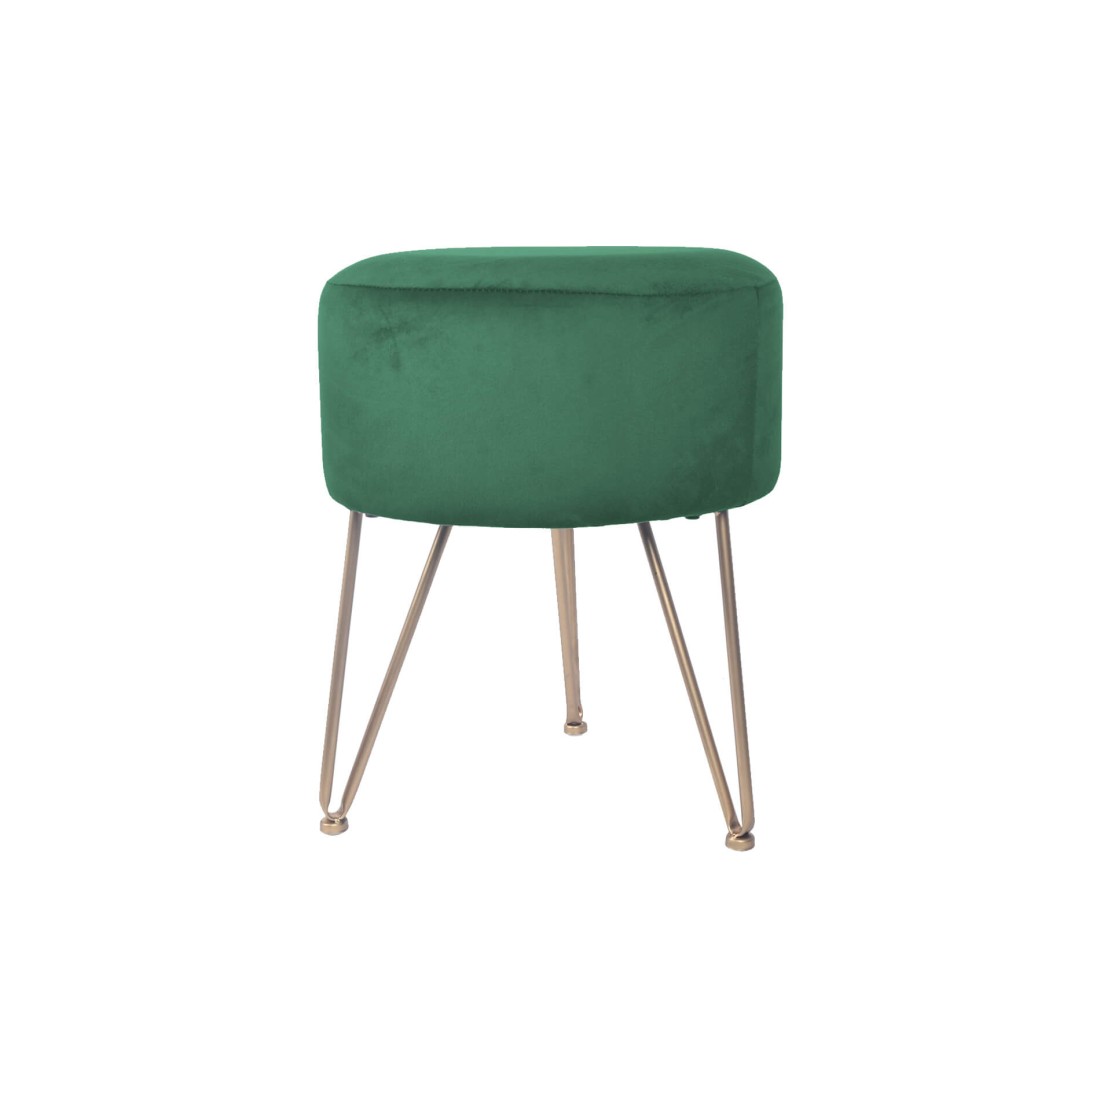 Isatis - Classic-style green padded stool